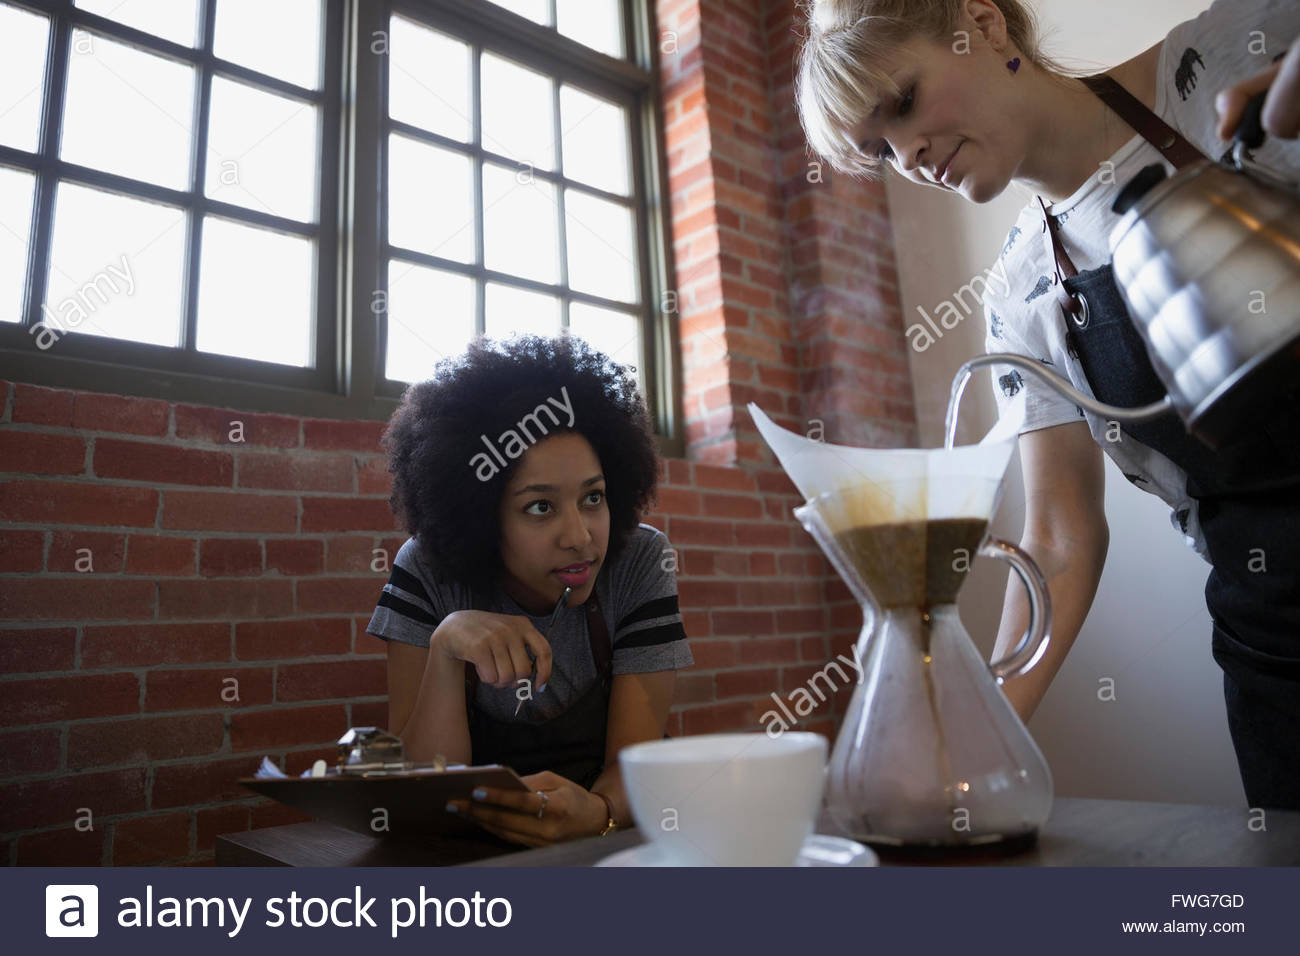 Baristas monitoring pour over coffee making Stock Photo